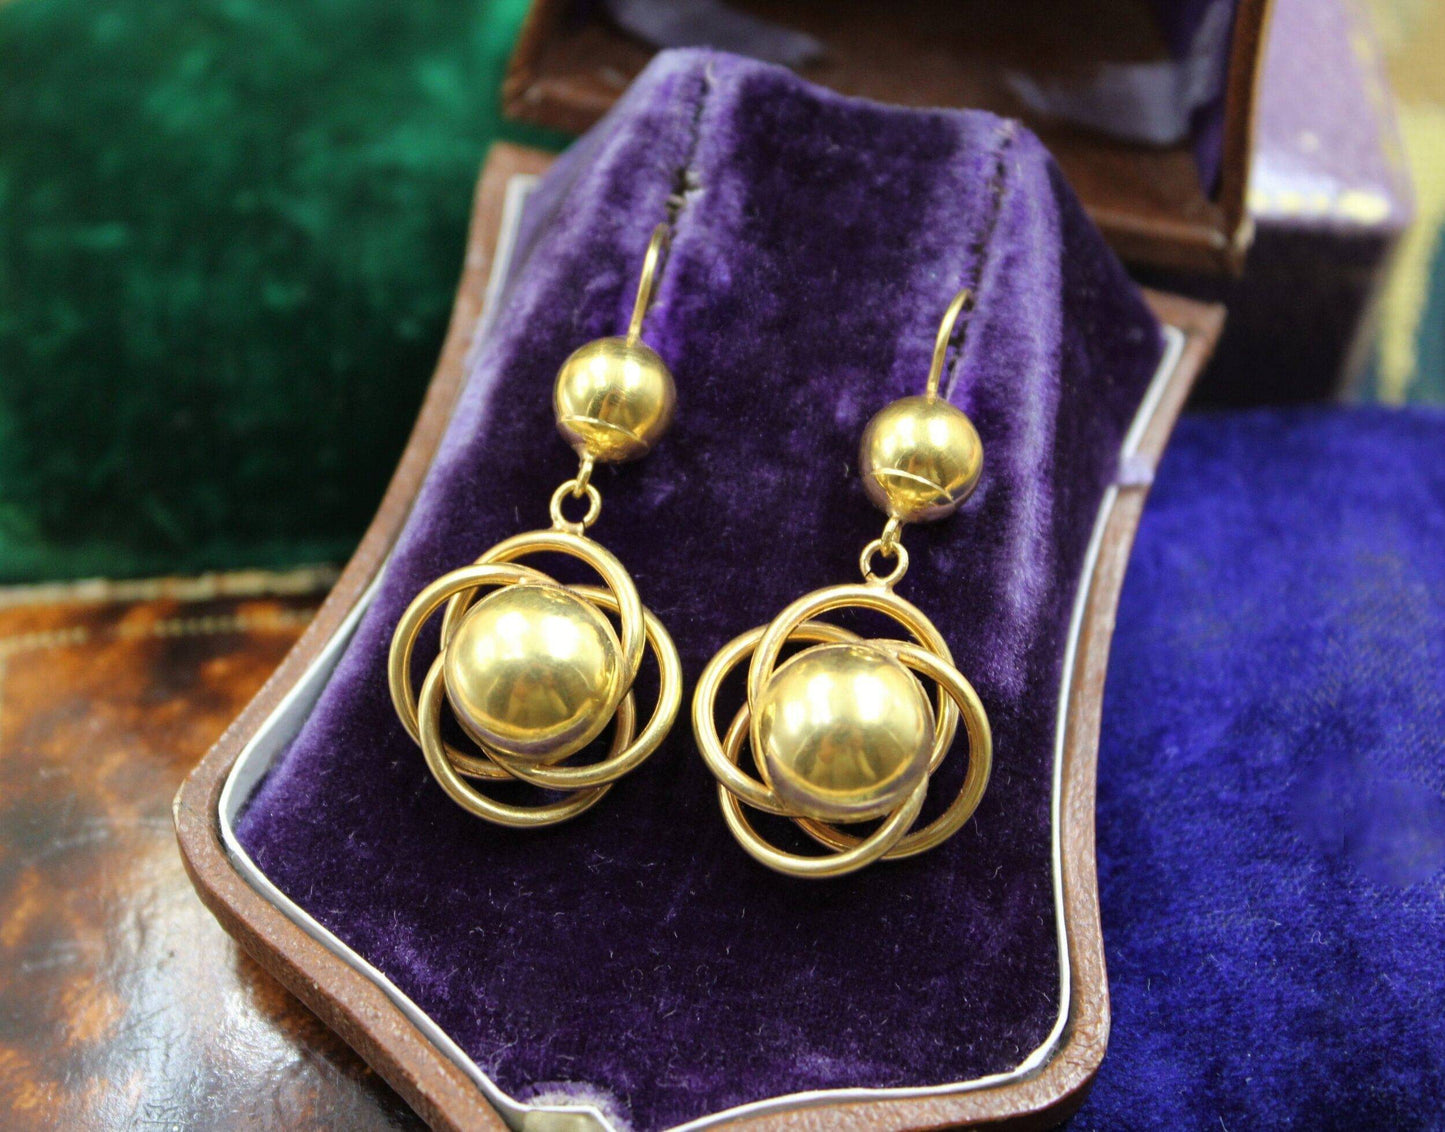 A very fine pair of Celestial Earrings in High Carat Yellow Gold, English, Circa 1880 - 1910 - Robin Haydock Antiques